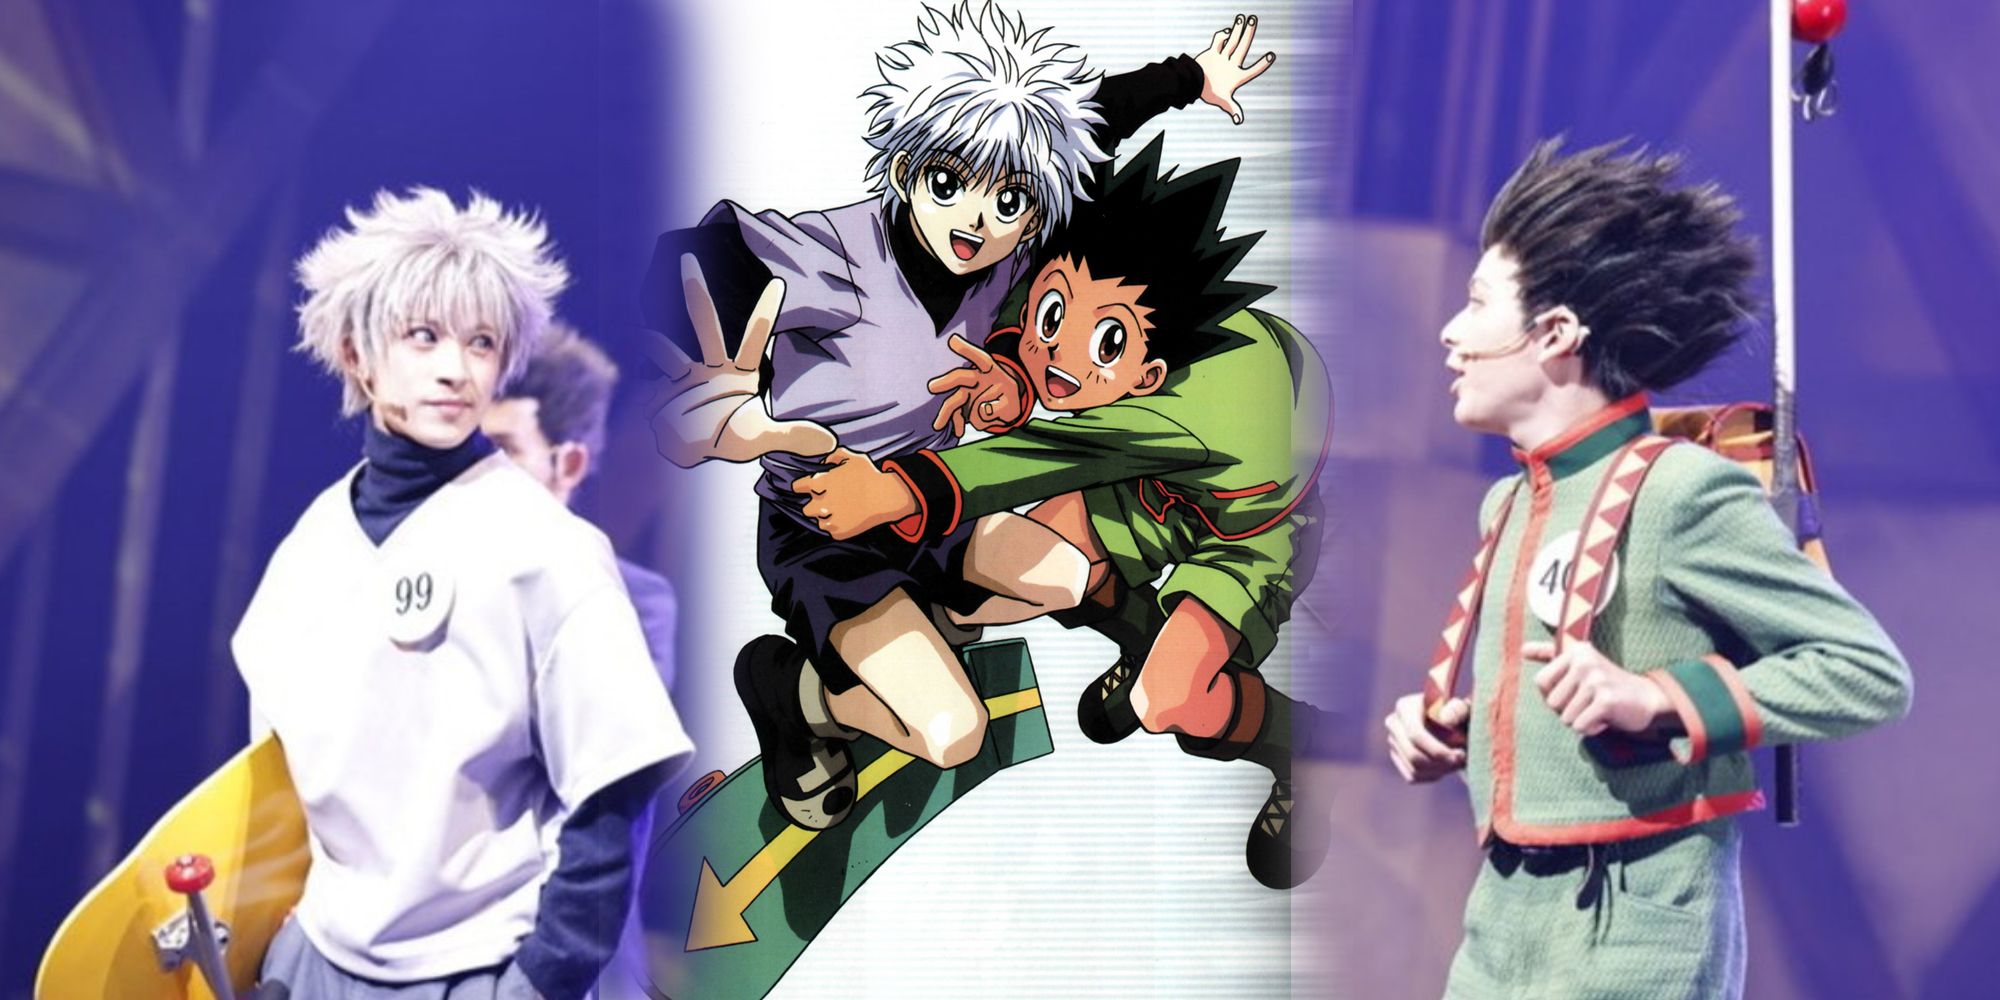 Hunter X Hunter stage play and 1999 Togashi art